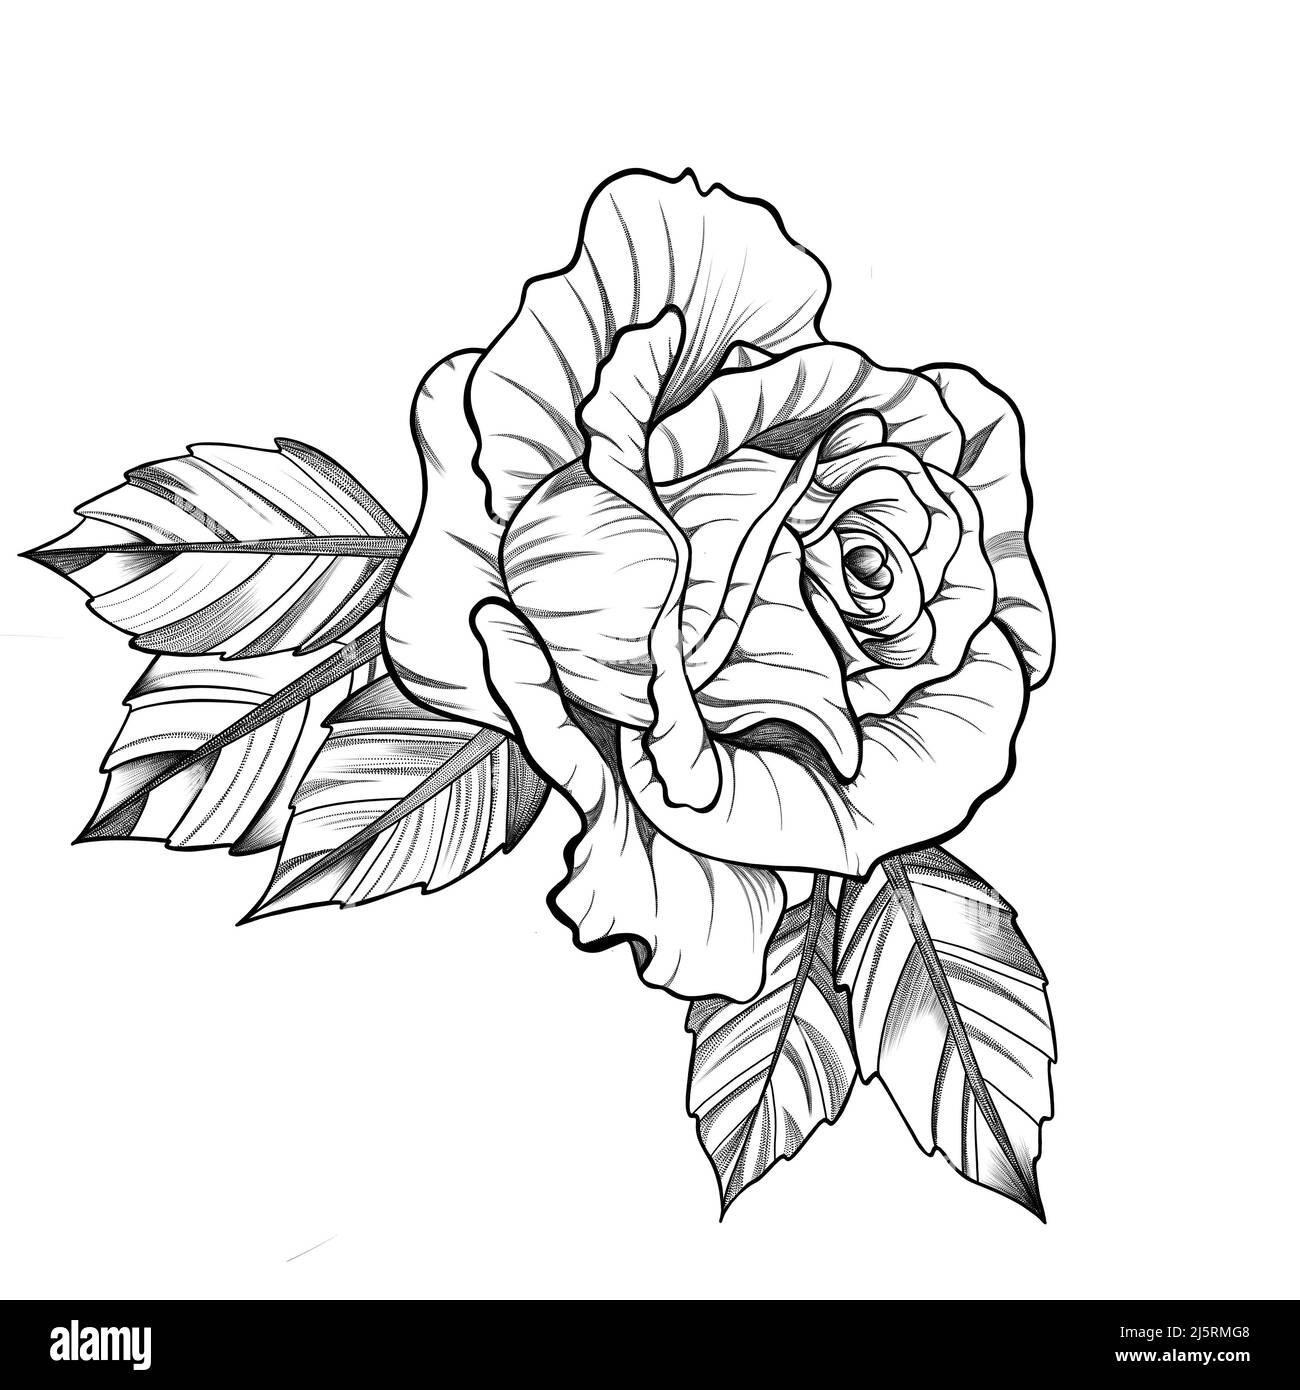 669 Three Roses Tattoo Images, Stock Photos & Vectors | Shutterstock